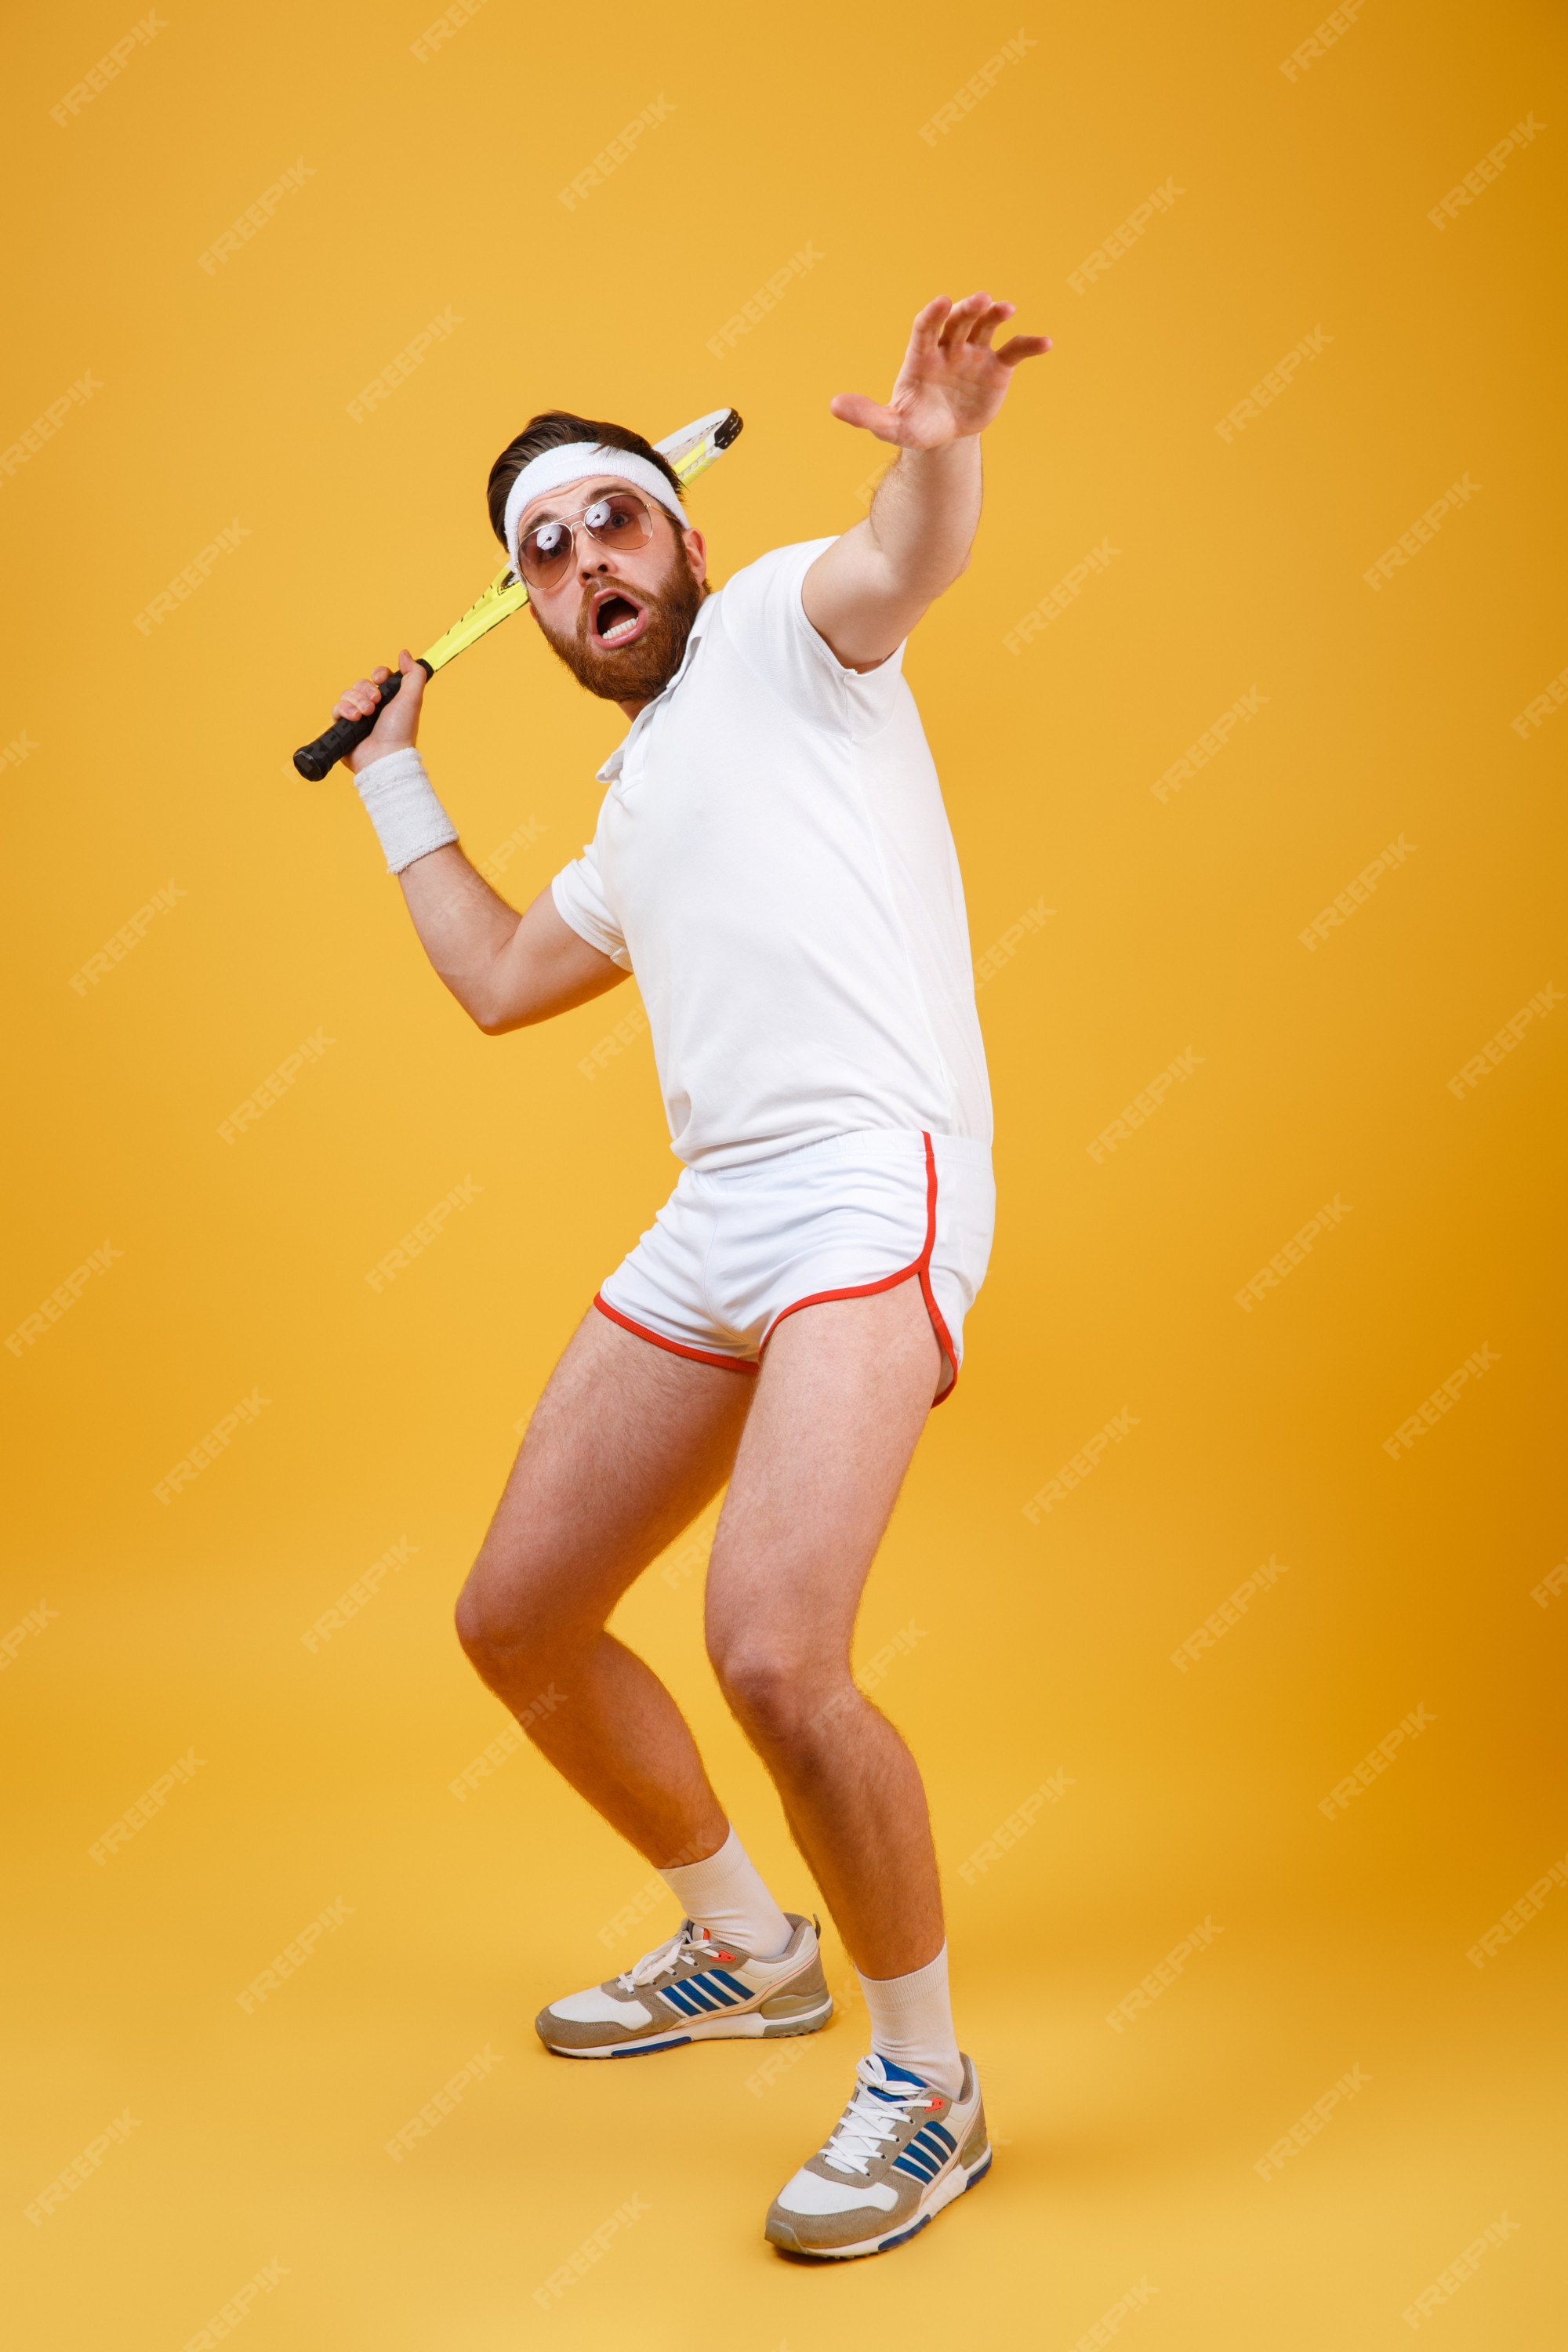 Free Photo | Vertical image of funny sportsman playing in tennis